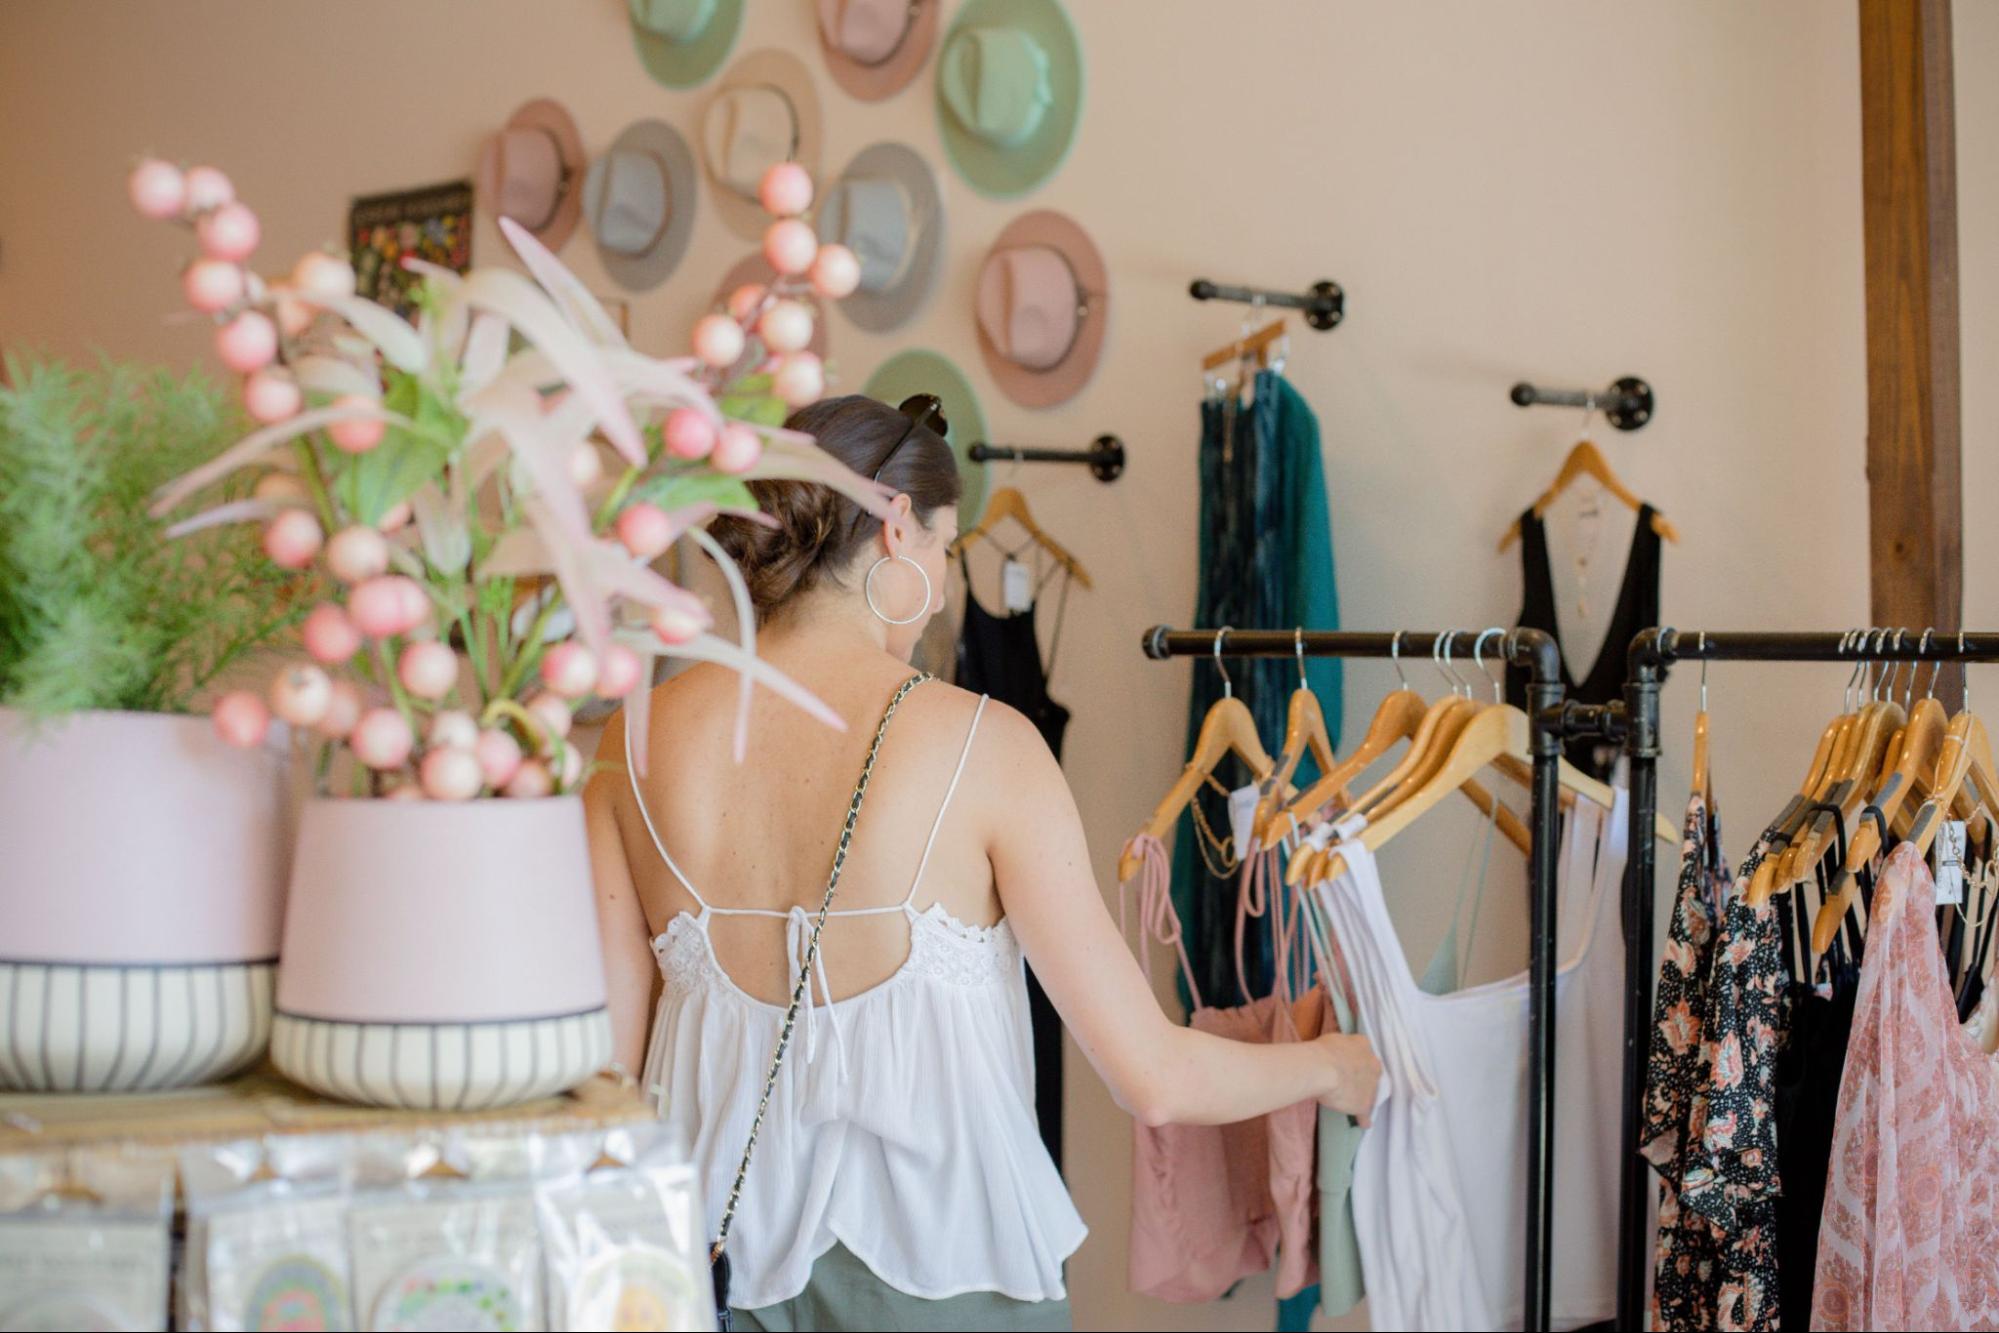 Person in a white top browses racks of clothing in a store. There are two pink pots to the left of the frame with plants in them.